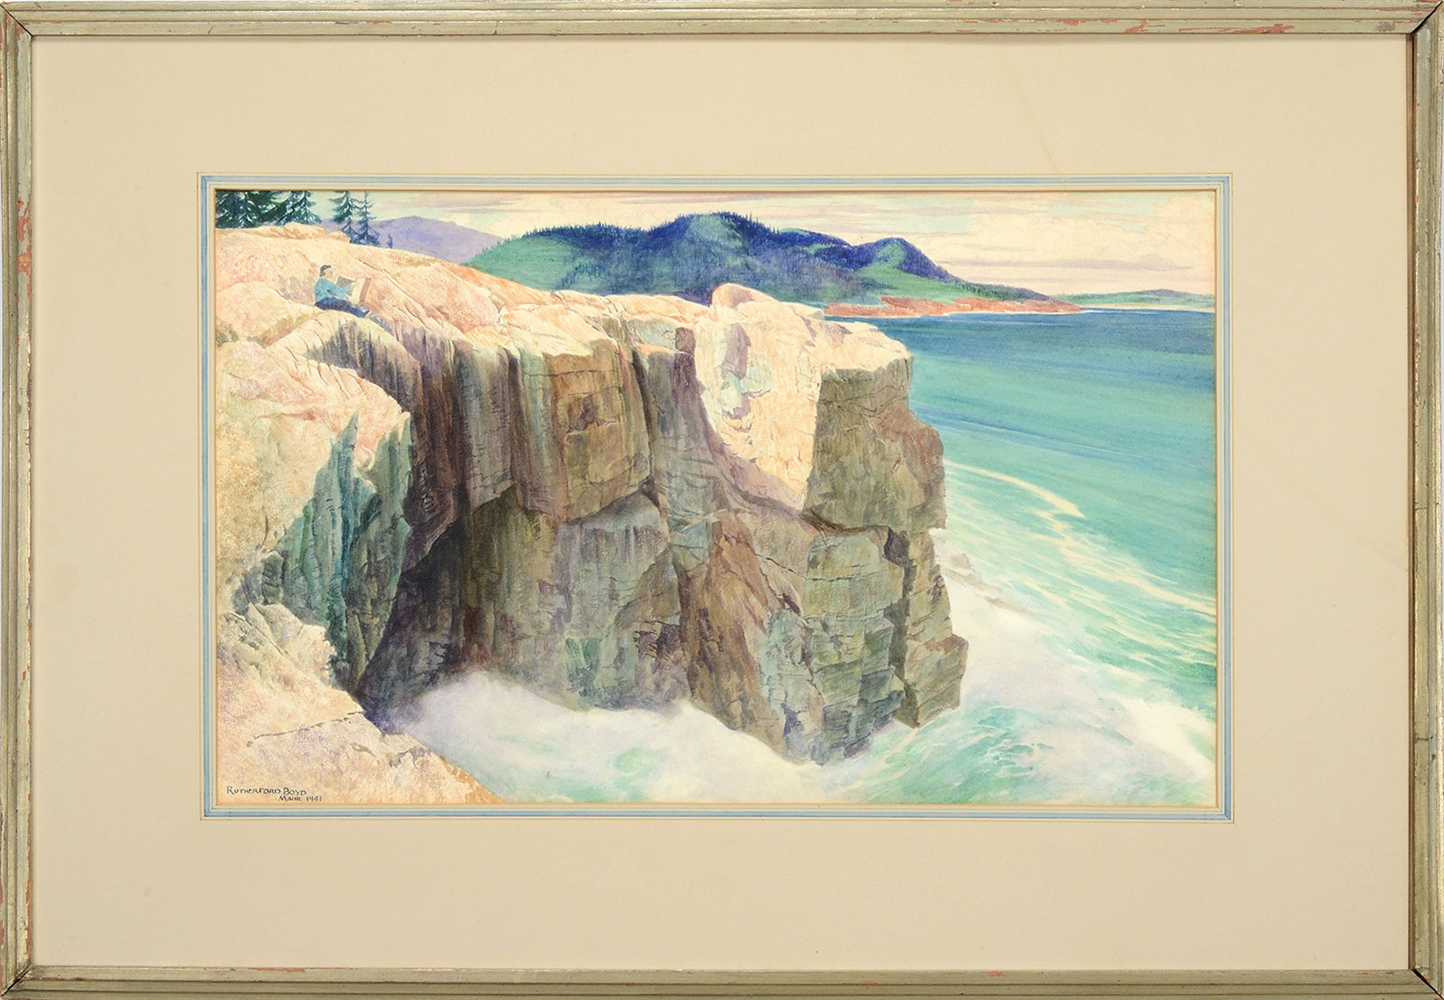 (JOHN) RUTHERFORD BOYD (AMERICAN, 1884-1951) SKETCHING ON THE COAST OF MAINE                                                                                                                            